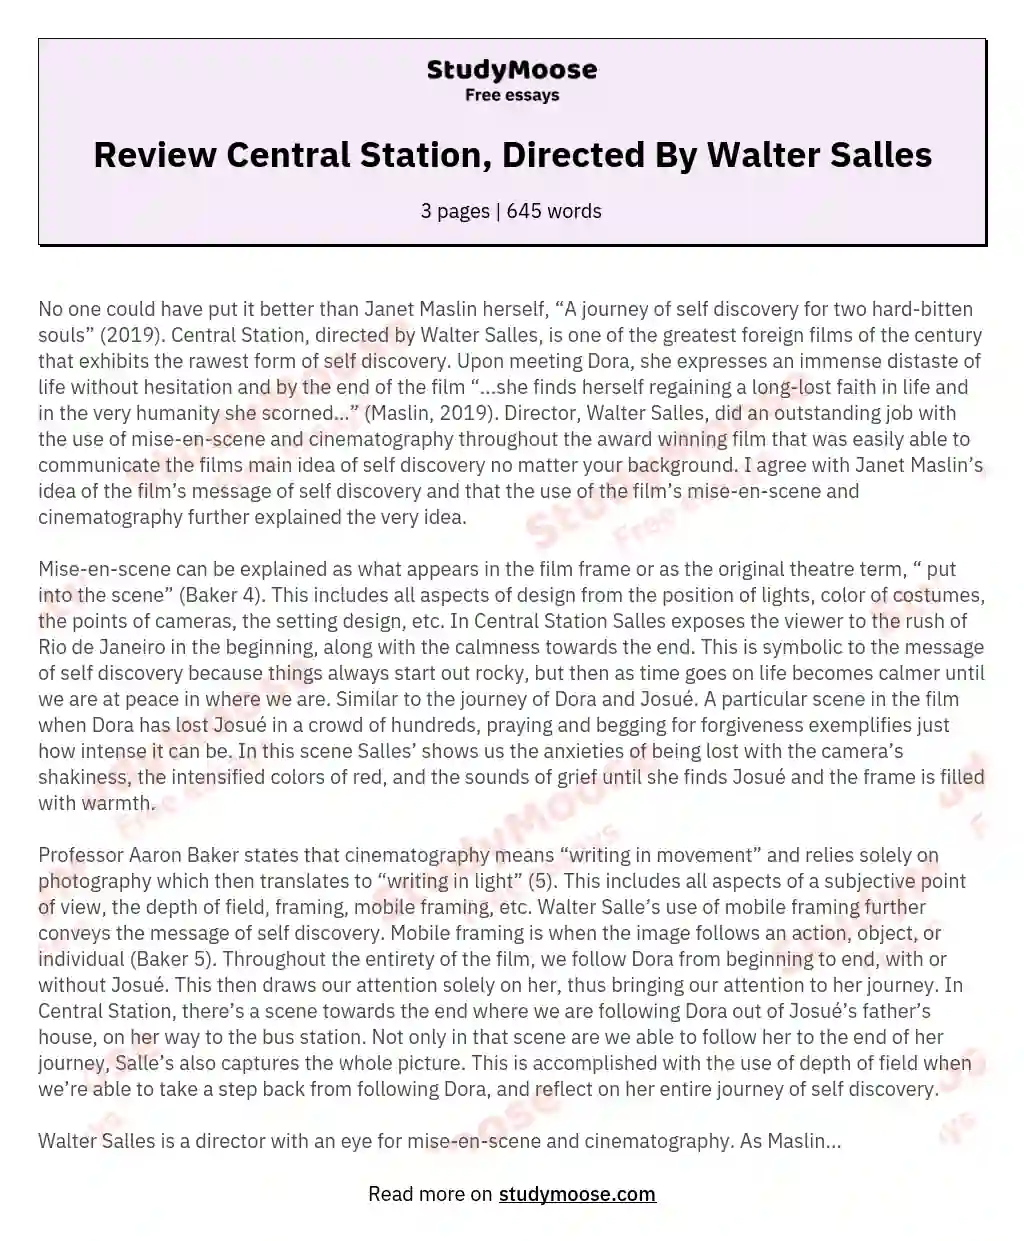 Review Central Station, Directed By Walter Salles essay